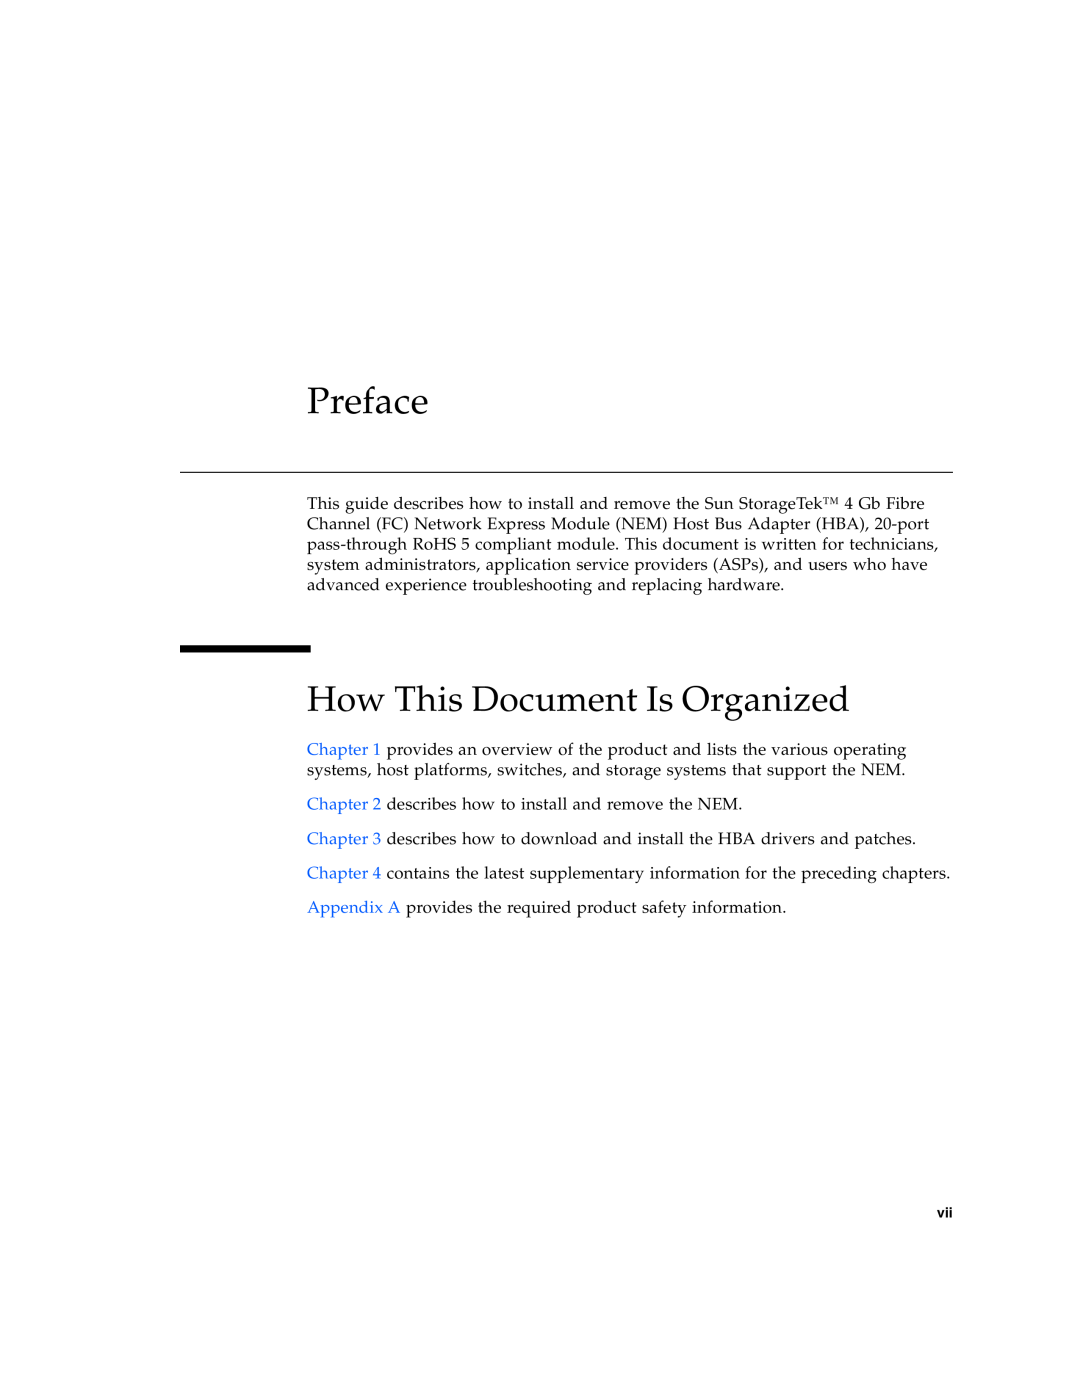 Sun Microsystems 2.0 manual Preface, How This Document Is Organized 